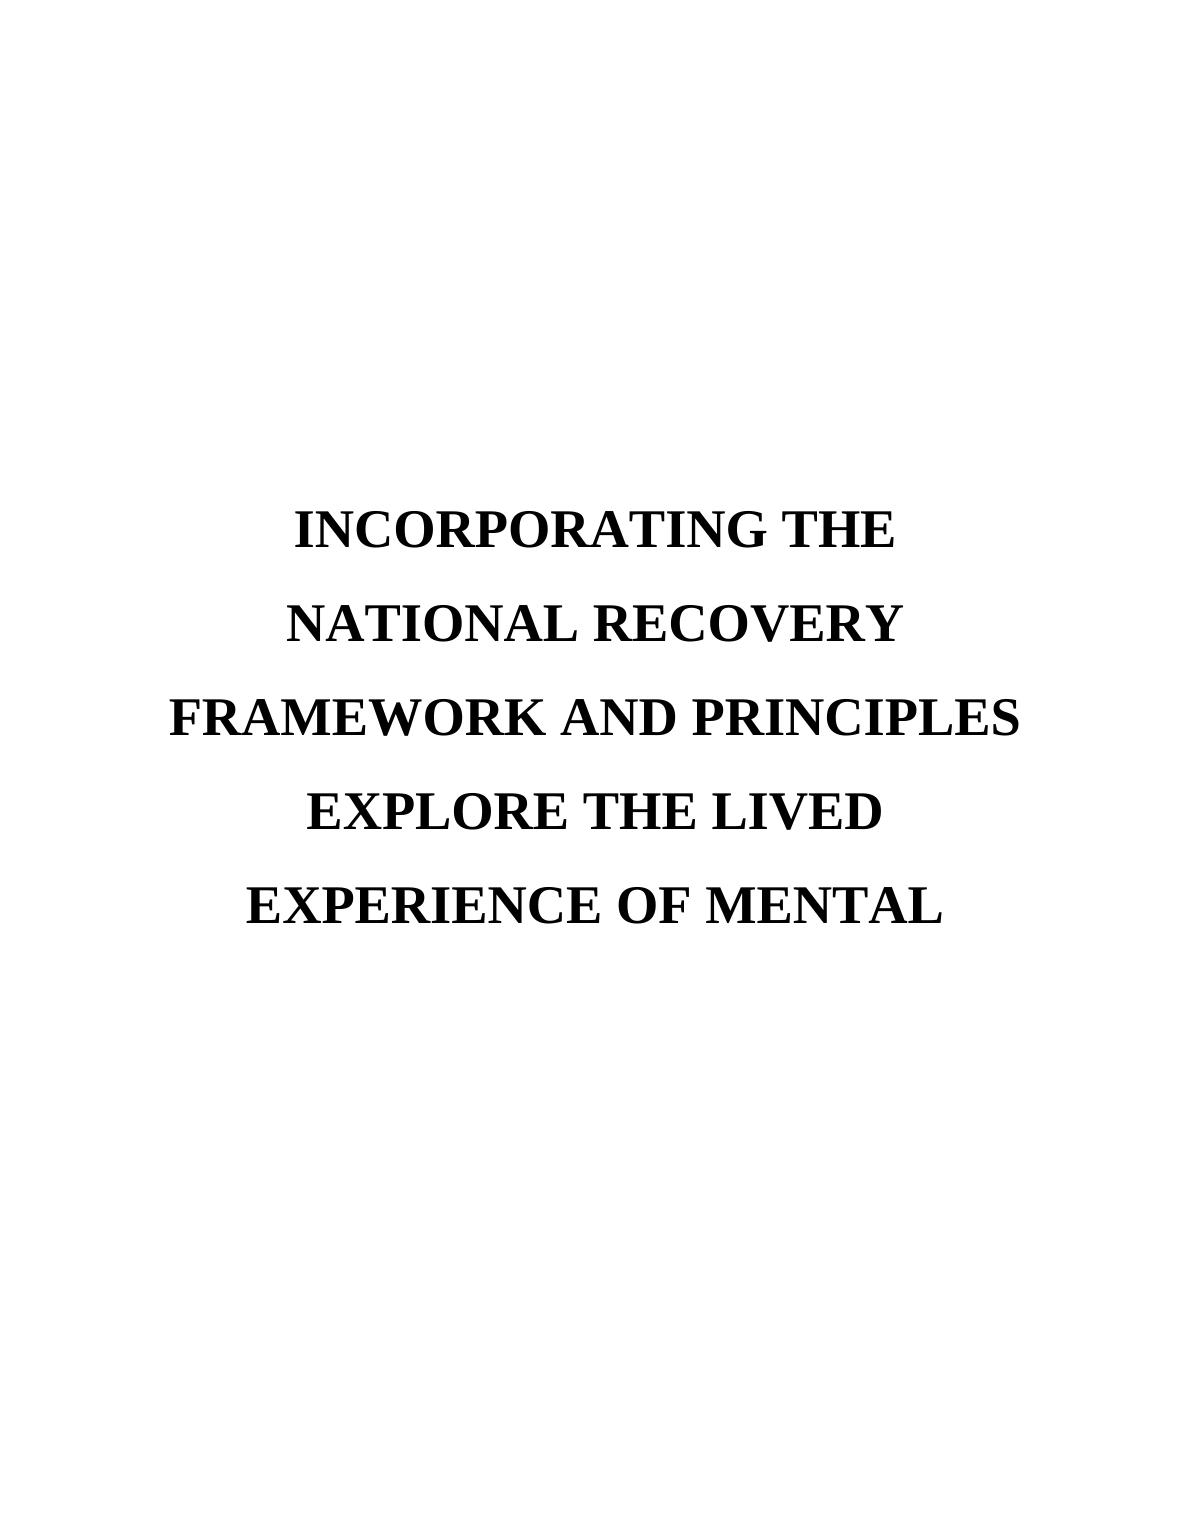 The National Recovery Framework and Principles - Assignment_1